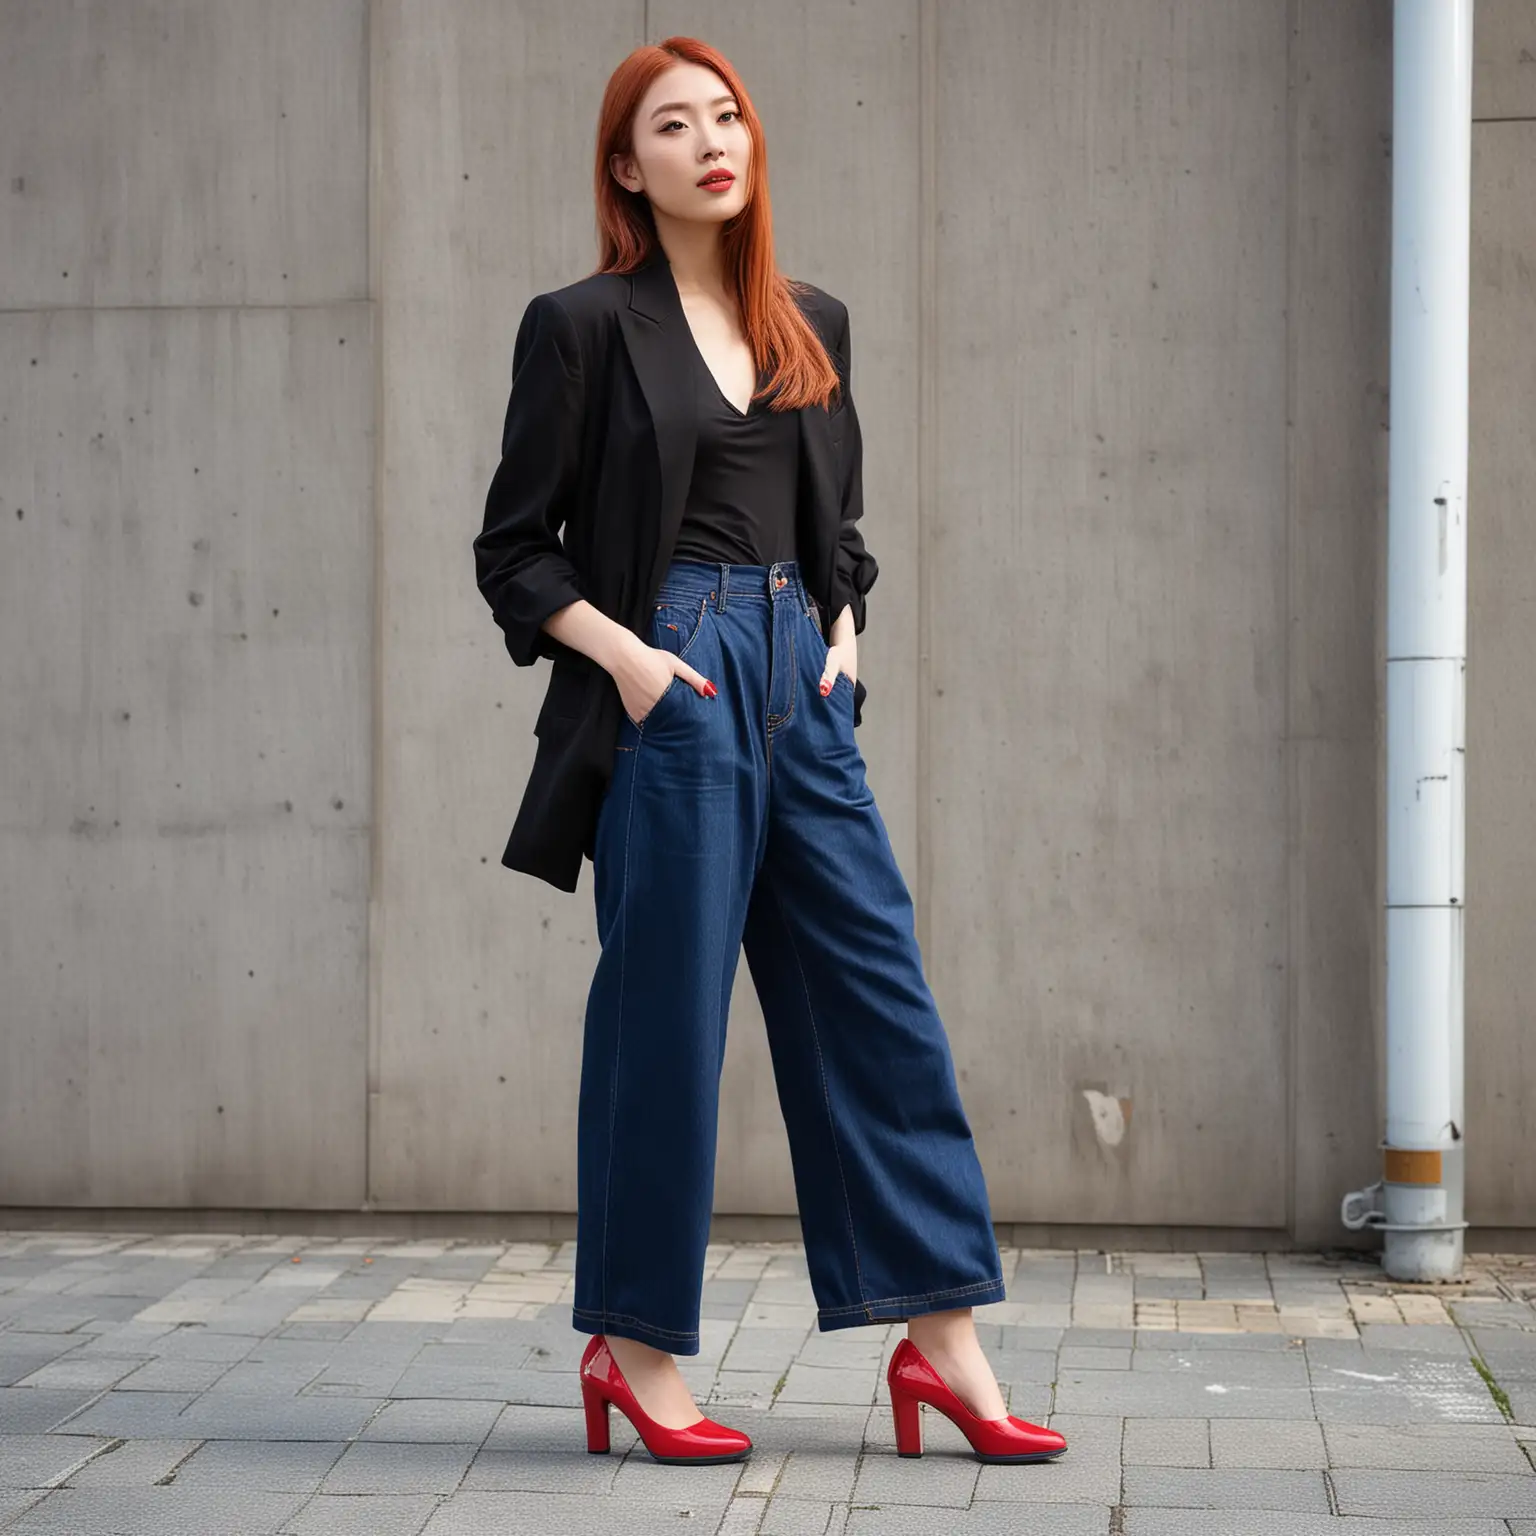 Fashionable Woman in Oversized Black Blazer and Red High Heels with Blue Wide Leg Jeans in Japan